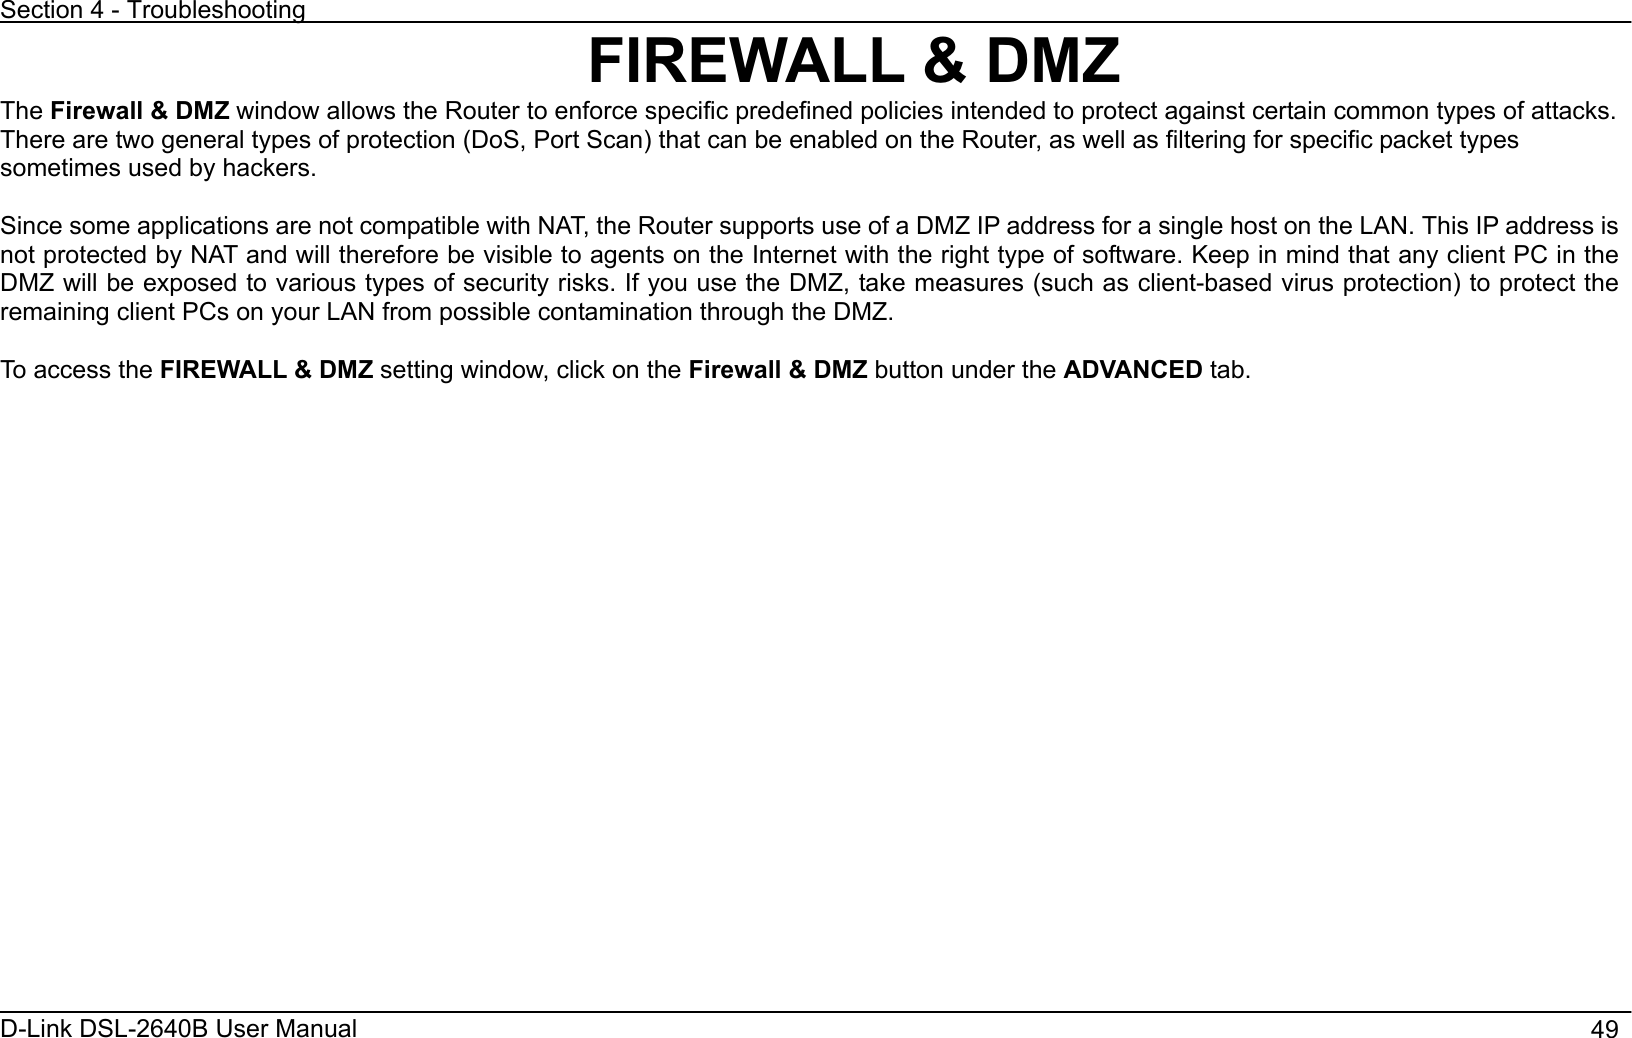 Section 4 - Troubleshooting D-Link DSL-2640B User Manual                                       49FIREWALL &amp; DMZ The Firewall &amp; DMZ window allows the Router to enforce specific predefined policies intended to protect against certain common types of attacks. There are two general types of protection (DoS, Port Scan) that can be enabled on the Router, as well as filtering for specific packet types sometimes used by hackers. Since some applications are not compatible with NAT, the Router supports use of a DMZ IP address for a single host on the LAN. This IP address is not protected by NAT and will therefore be visible to agents on the Internet with the right type of software. Keep in mind that any client PC in the DMZ will be exposed to various types of security risks. If you use the DMZ, take measures (such as client-based virus protection) to protect the remaining client PCs on your LAN from possible contamination through the DMZ. To access the FIREWALL &amp; DMZ setting window, click on the Firewall &amp; DMZ button under the ADVANCED tab. 